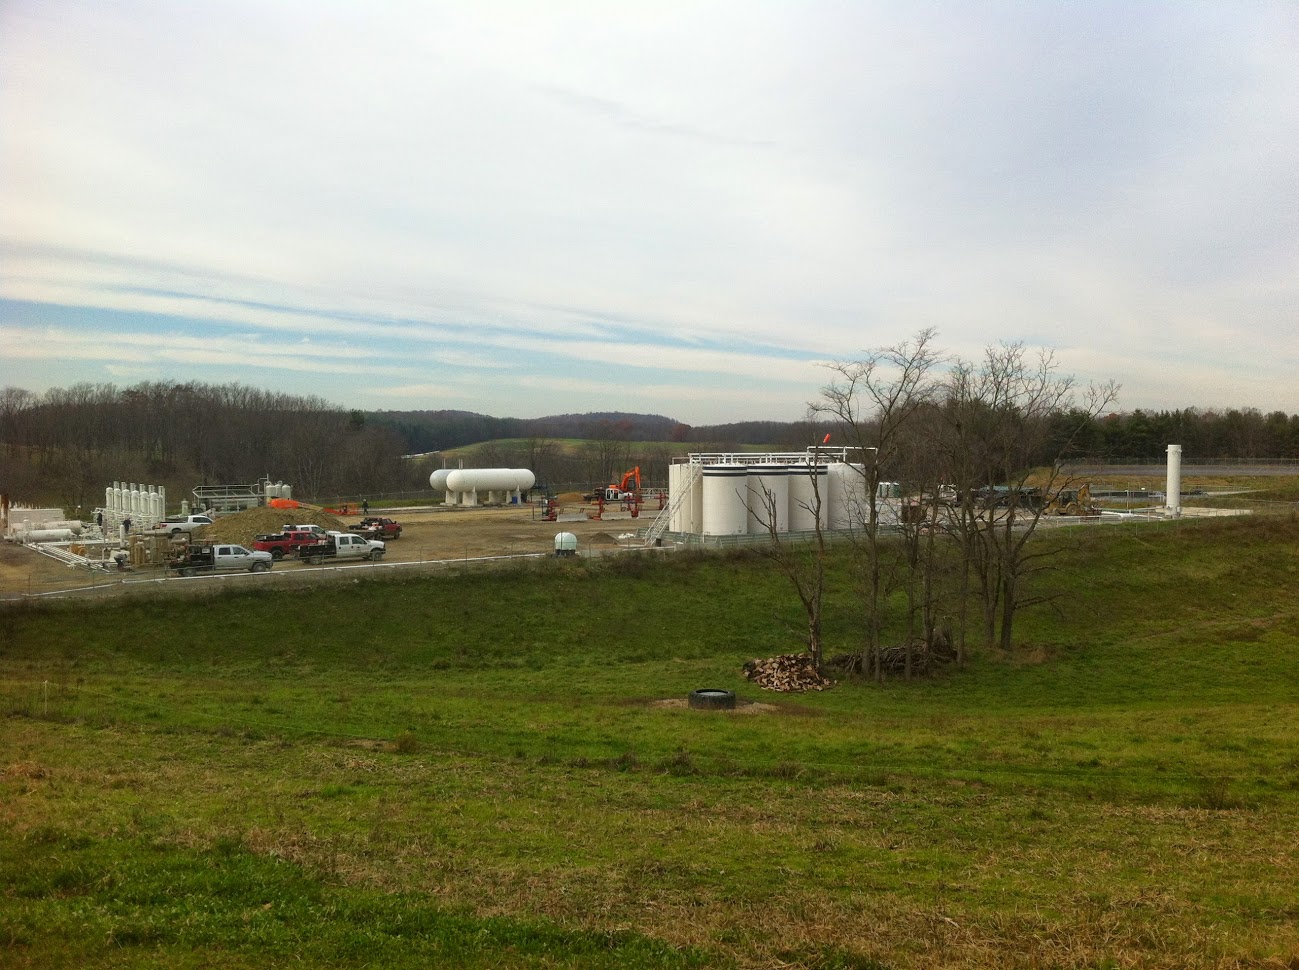 Drilling well pad in Carroll County, Ohio